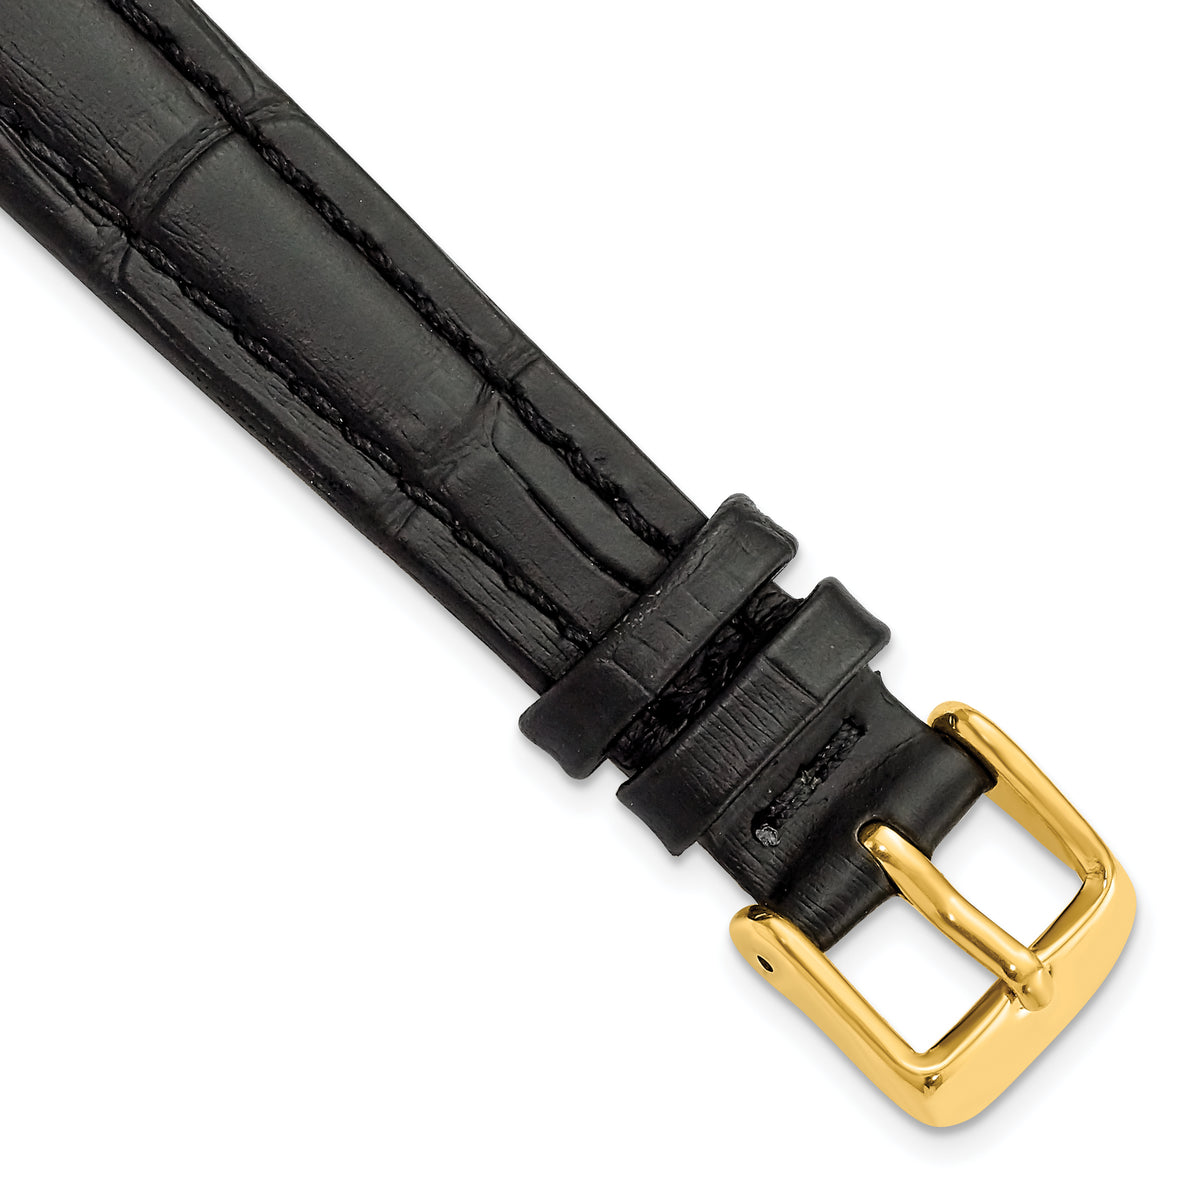 DeBeer 14mm Black Matte Alligator Grain Leather with Gold-tone Buckle 6.75 inch Watch Band